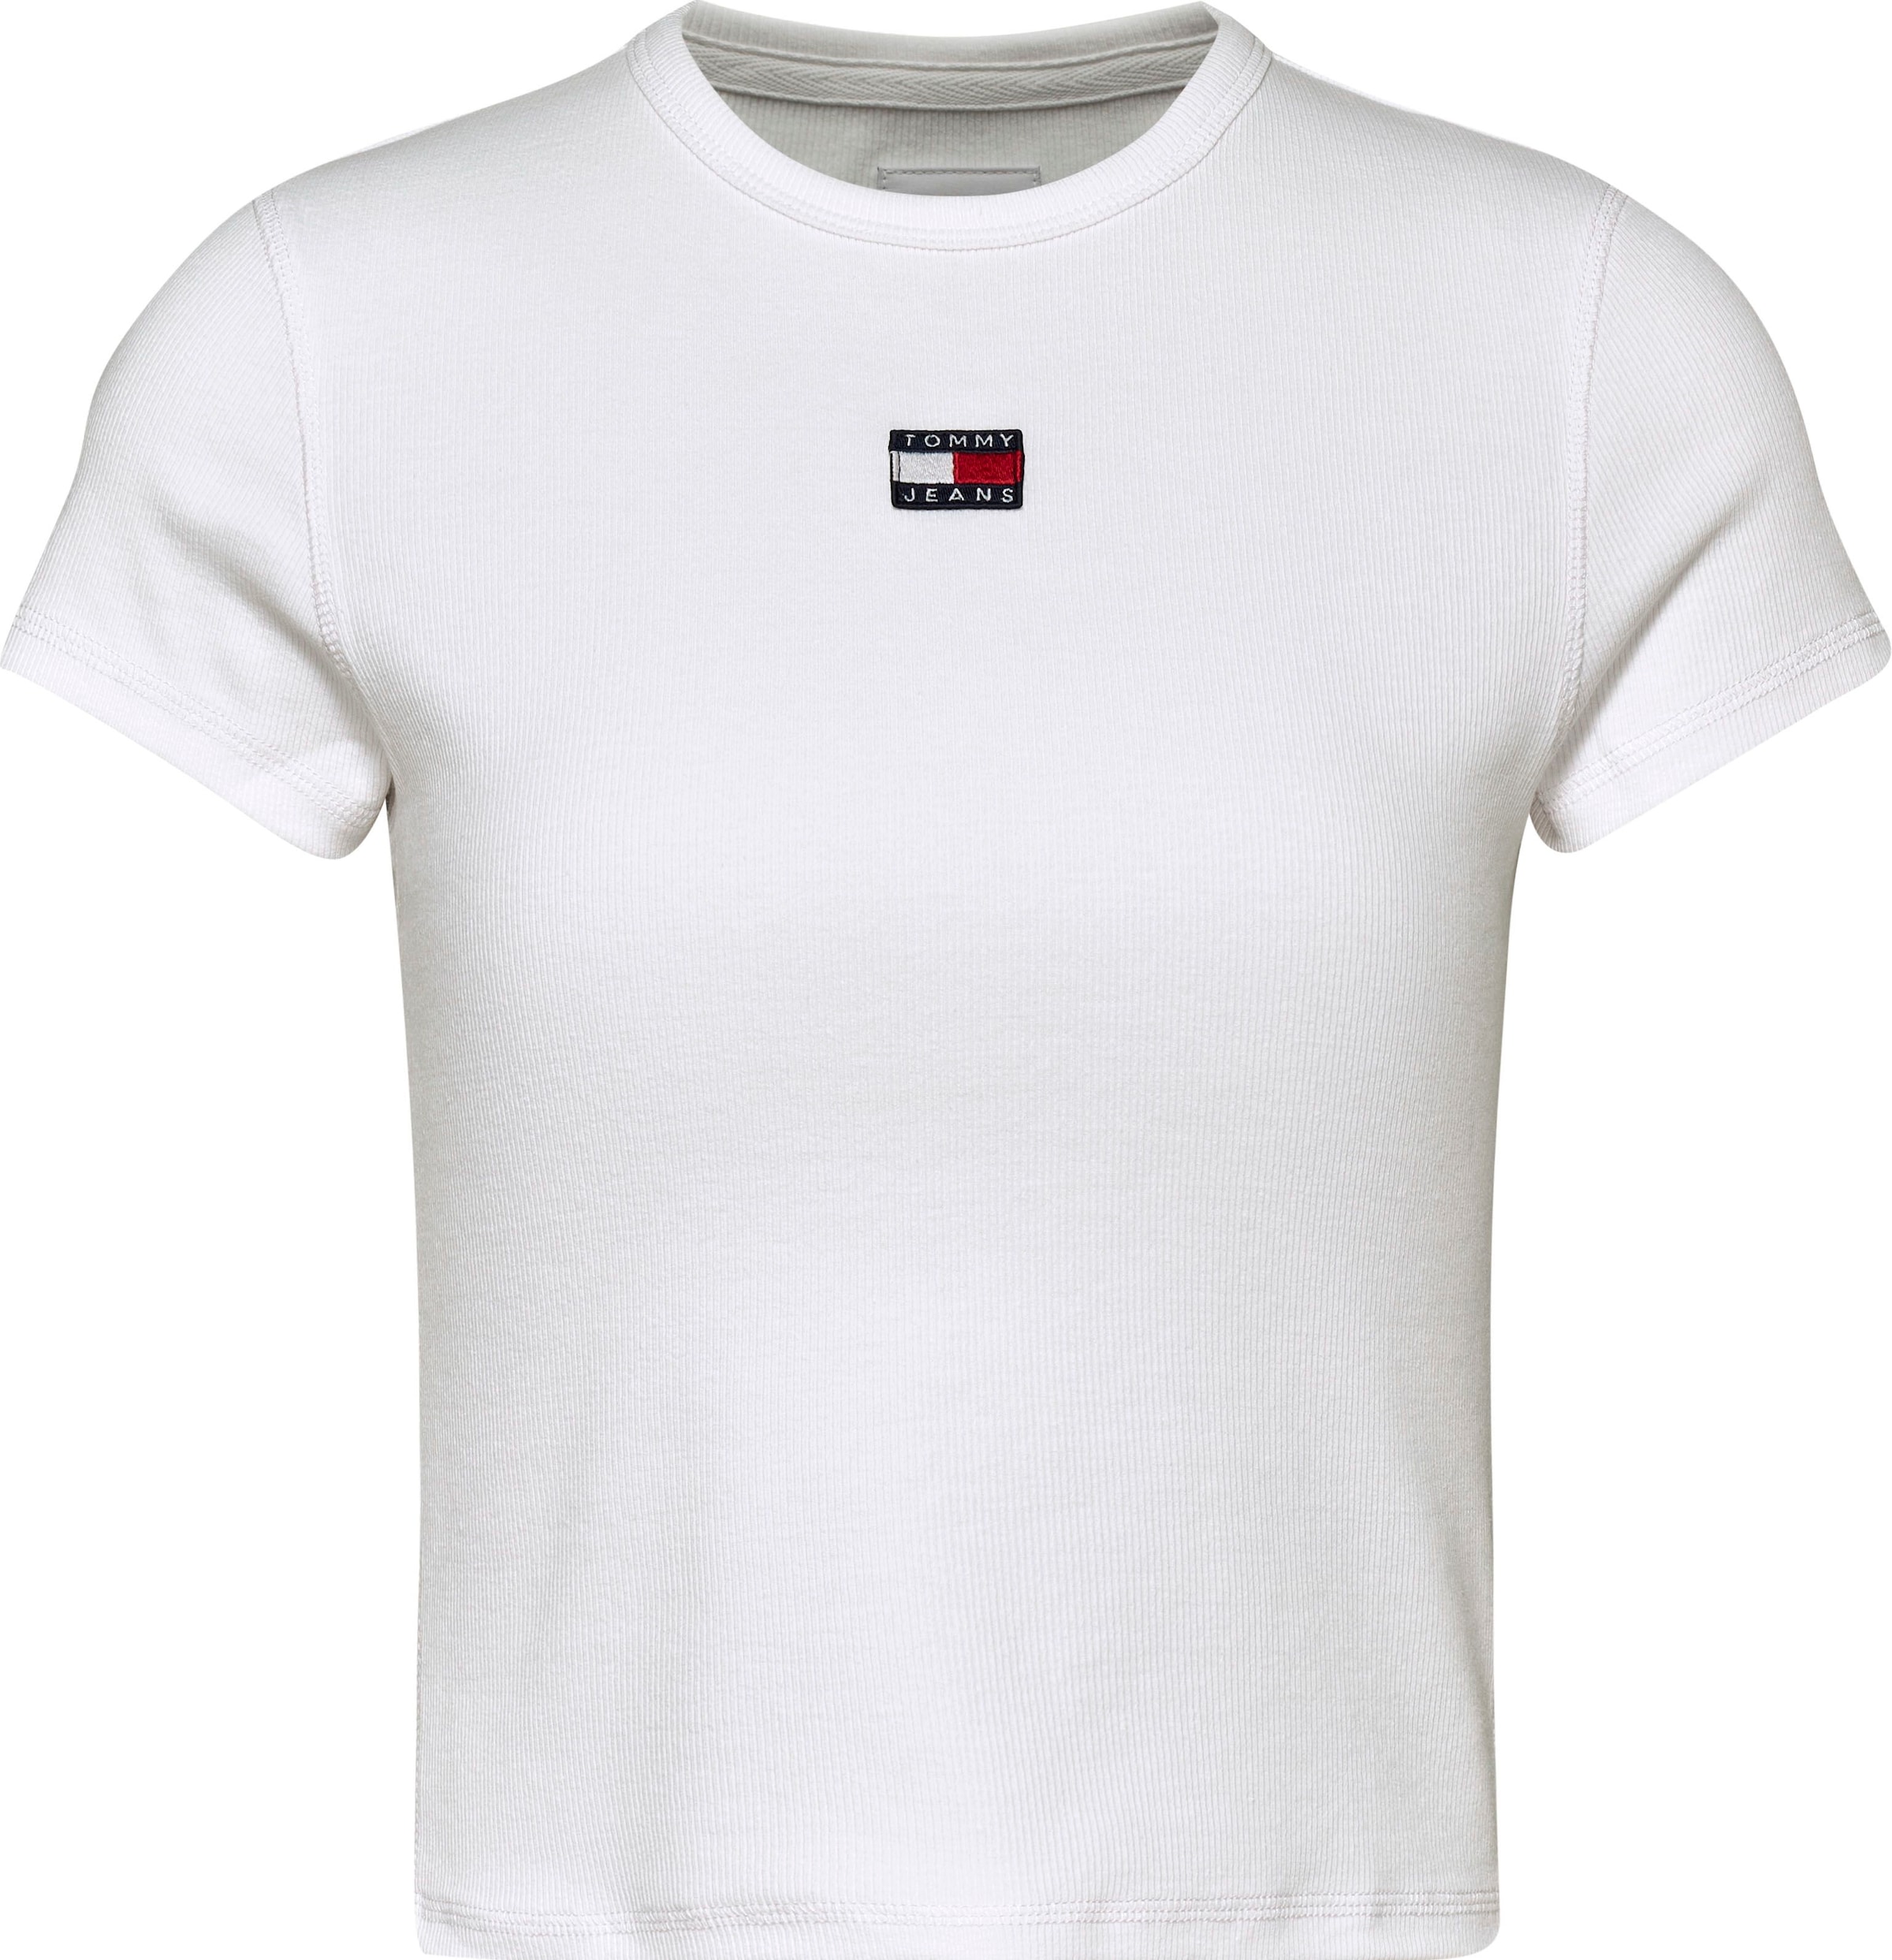 Tommy Jeans T-Shirt »TJW BBY RIB XS BADGE«, mit Logo-Badge online bei OTTO